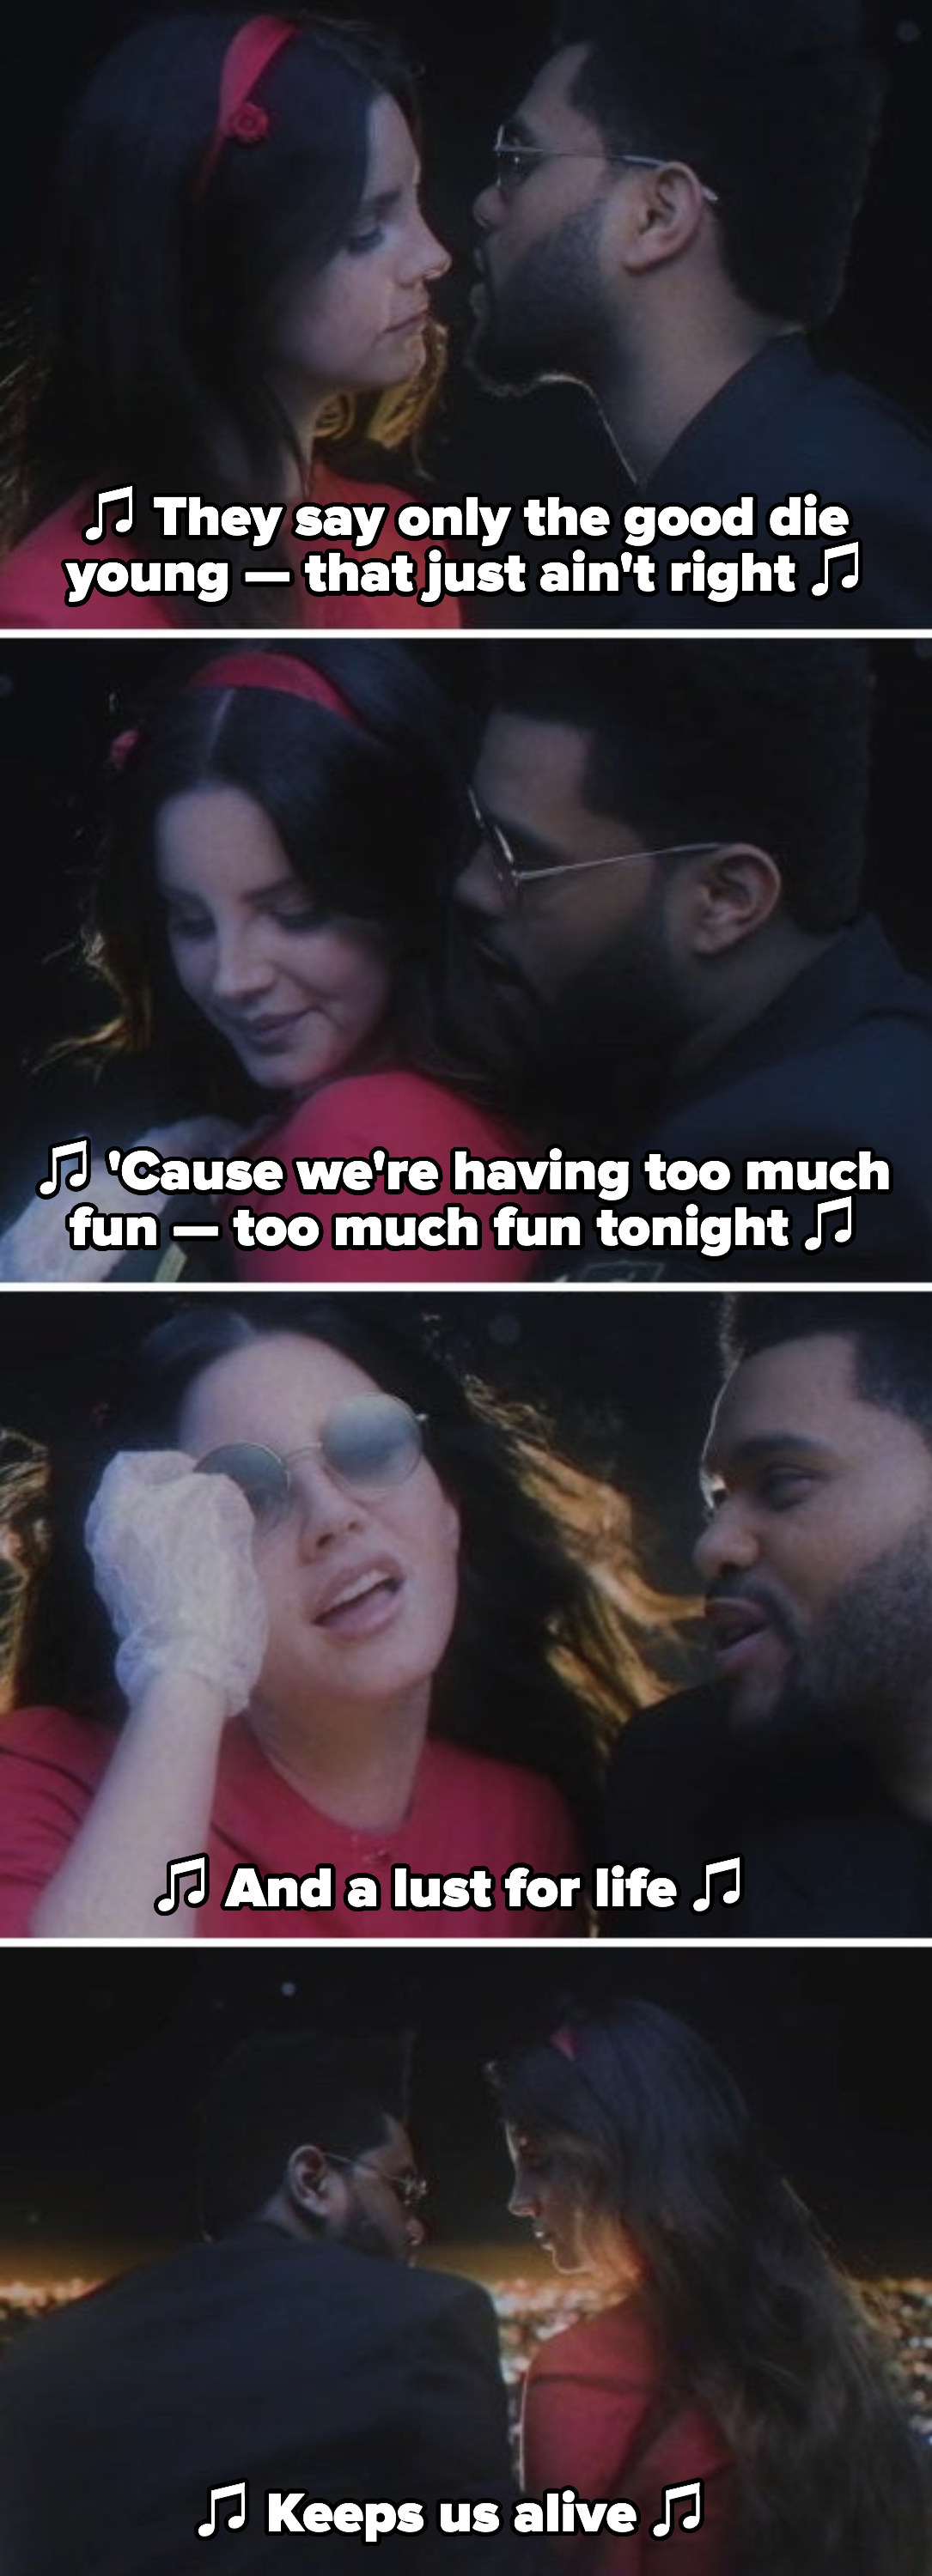 Lana Del Rey and the Weeknd in their &quot;Lust for Life&quot; music video, singing: &quot;A lust for life keeps us alive&quot;